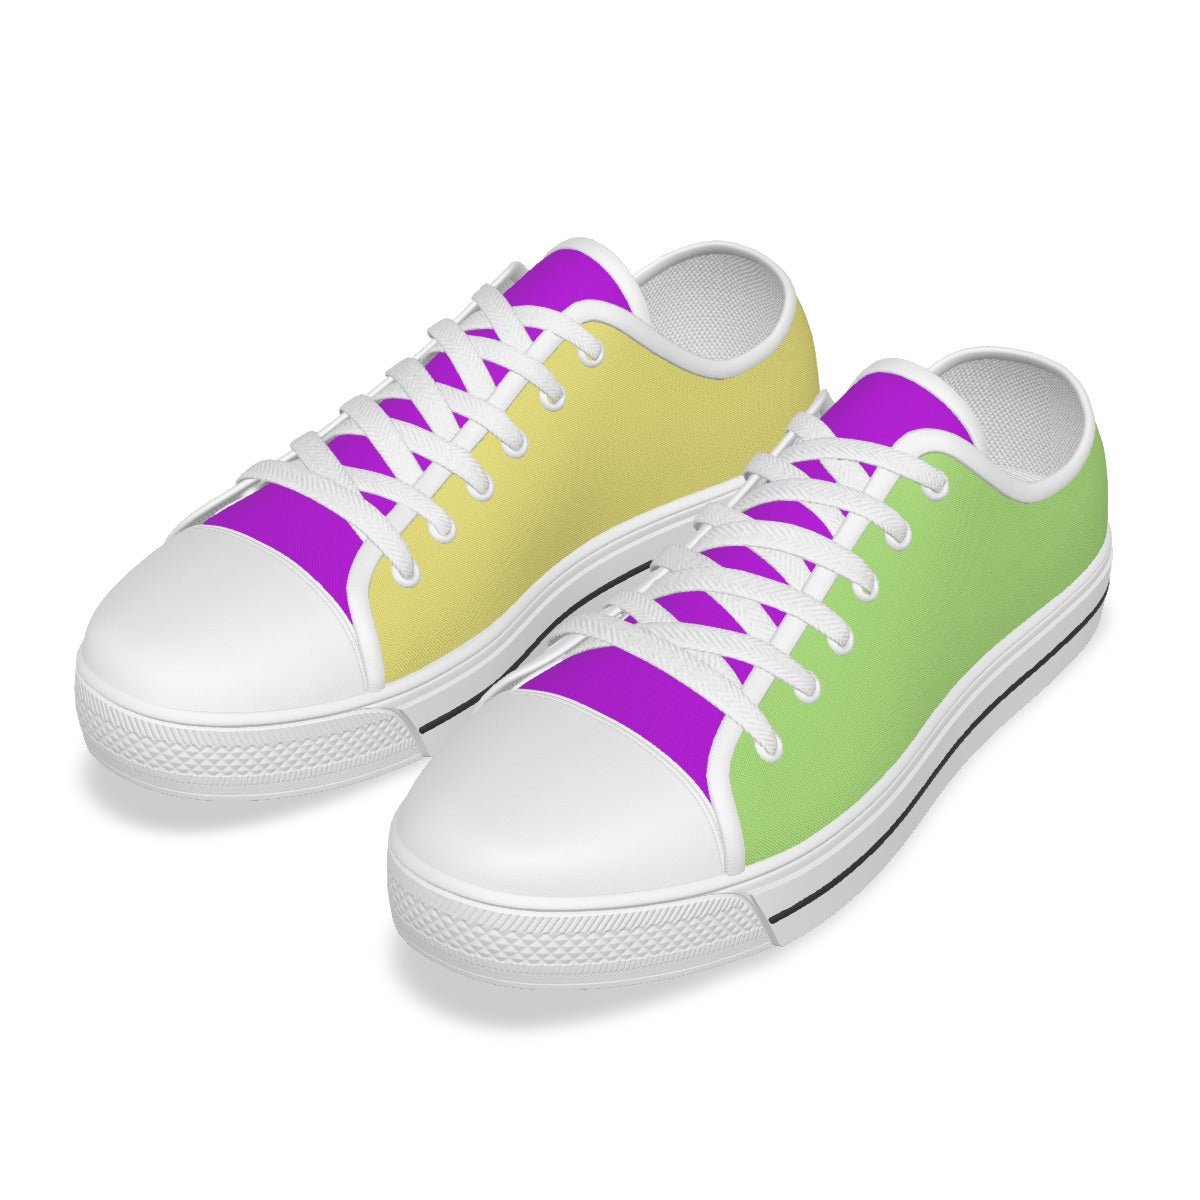 Yoga Shoes for Kids - Anti-Slippery Colorful Shoes - Personal Hour for Yoga and Meditations 